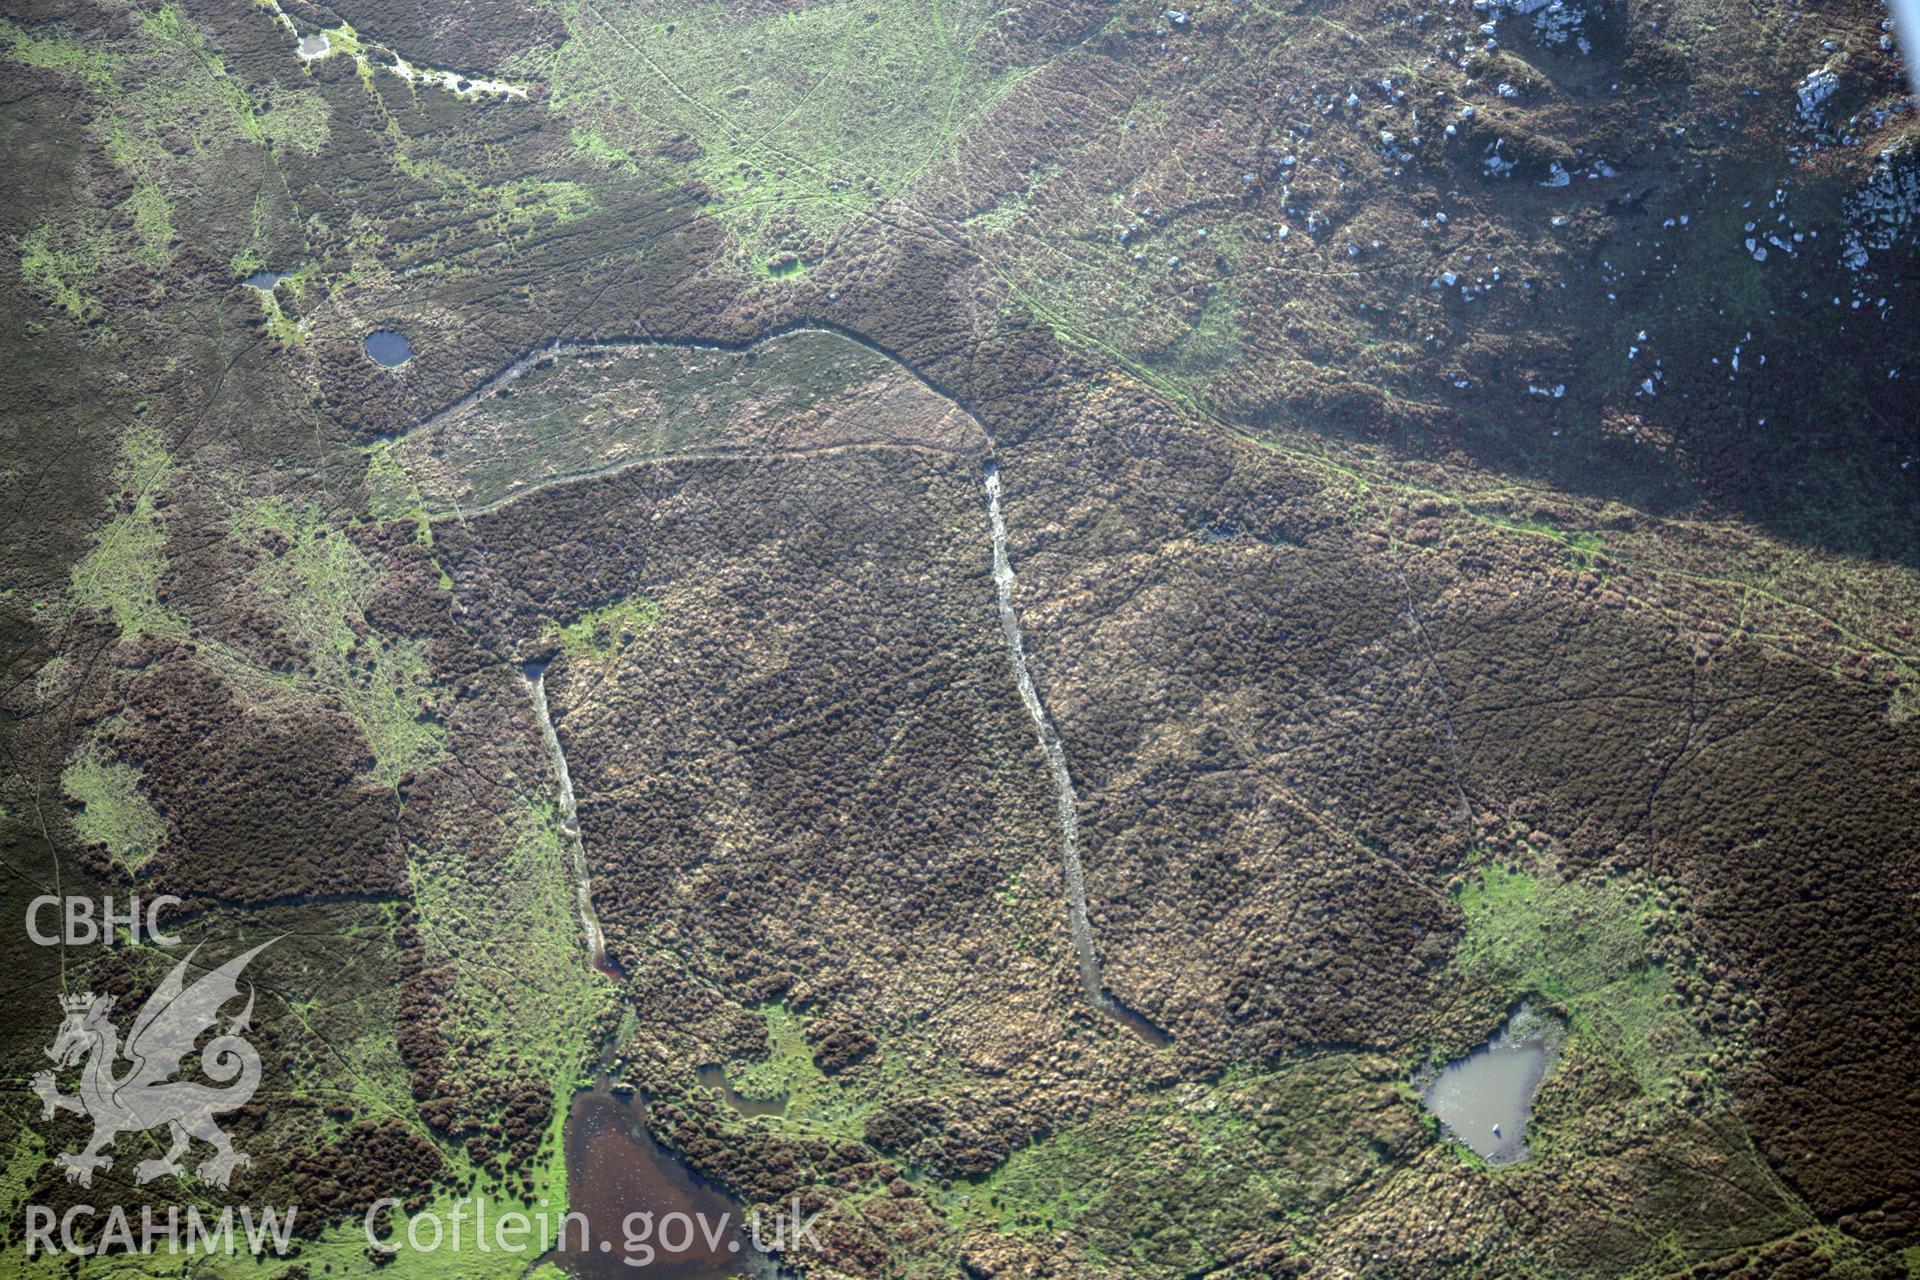 RCAHMW colour oblique photograph of relict field enclosure features, Ramsey Island. Taken by O. Davies & T. Driver on 22/11/2013.